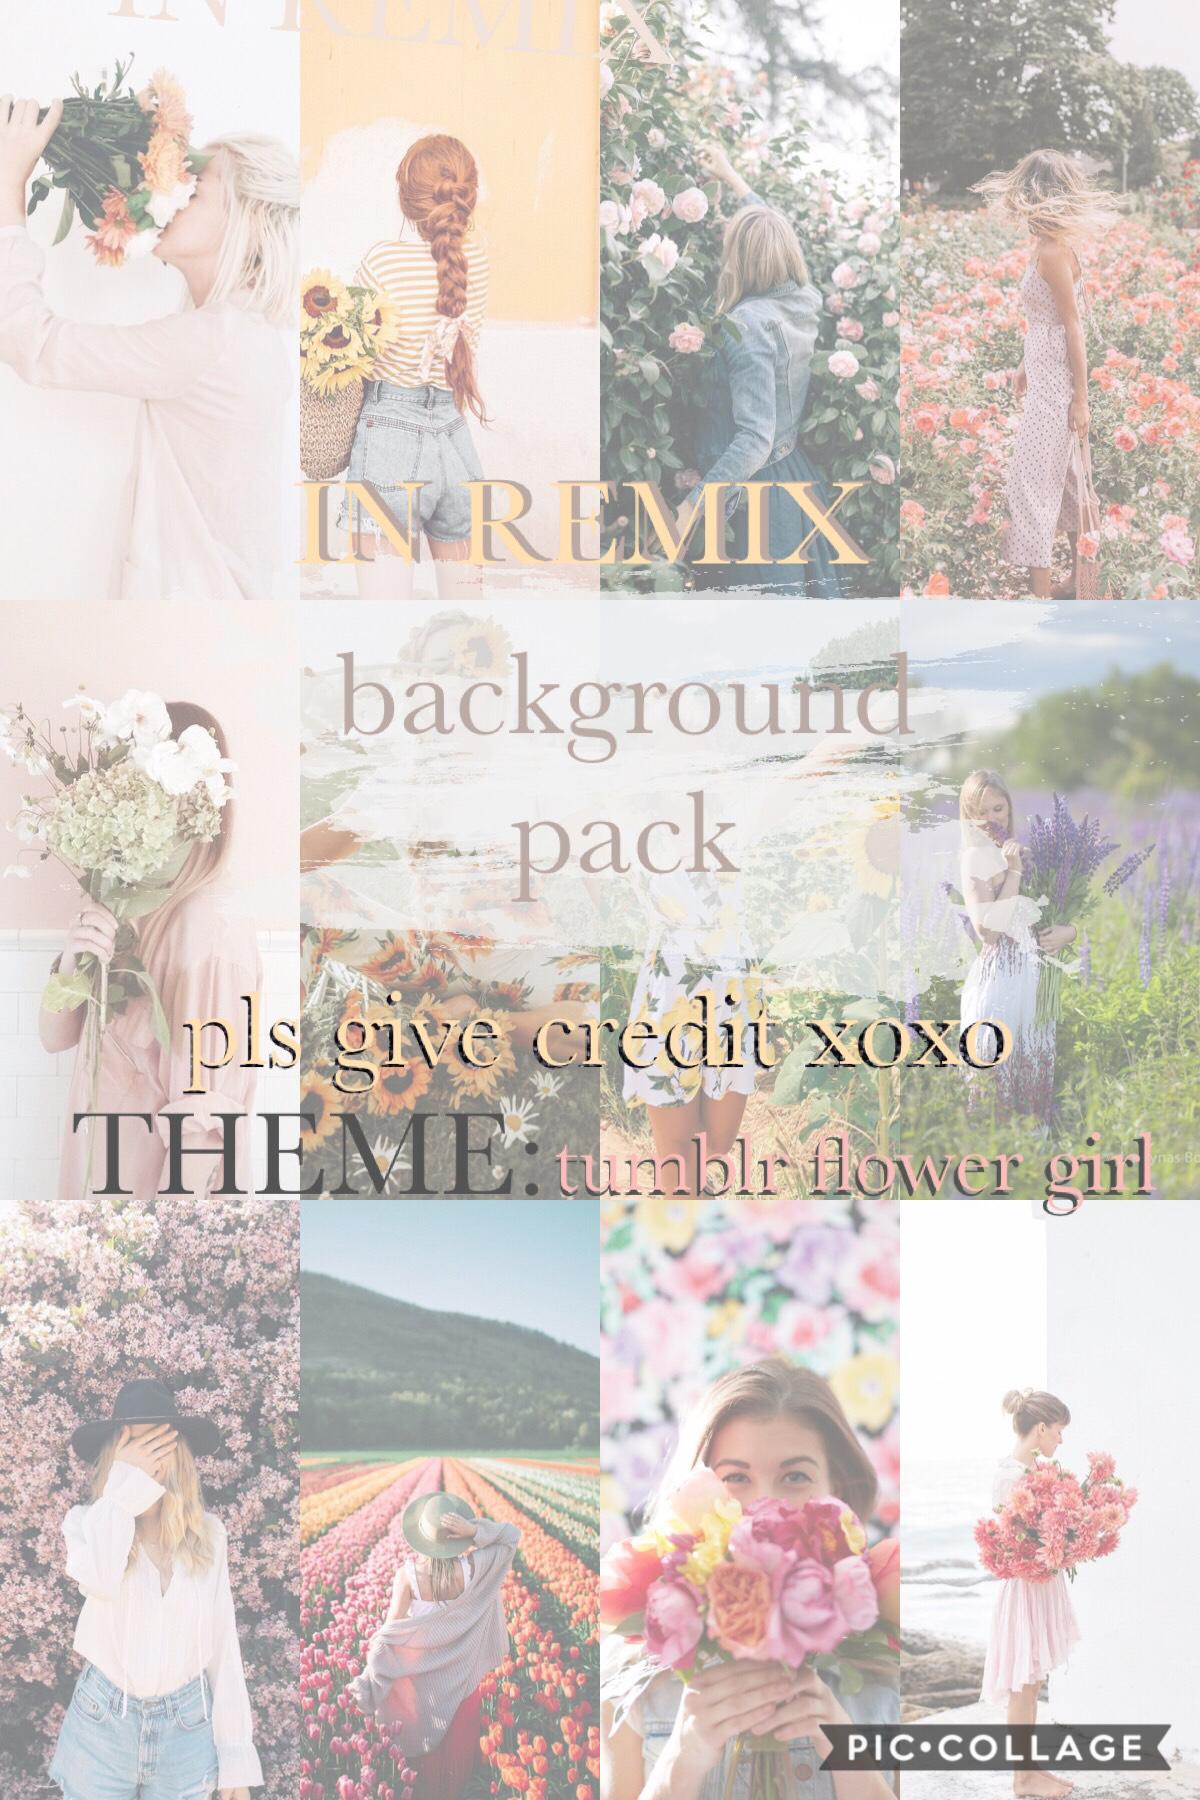 background pack in remixes!! pls give credit xoxo